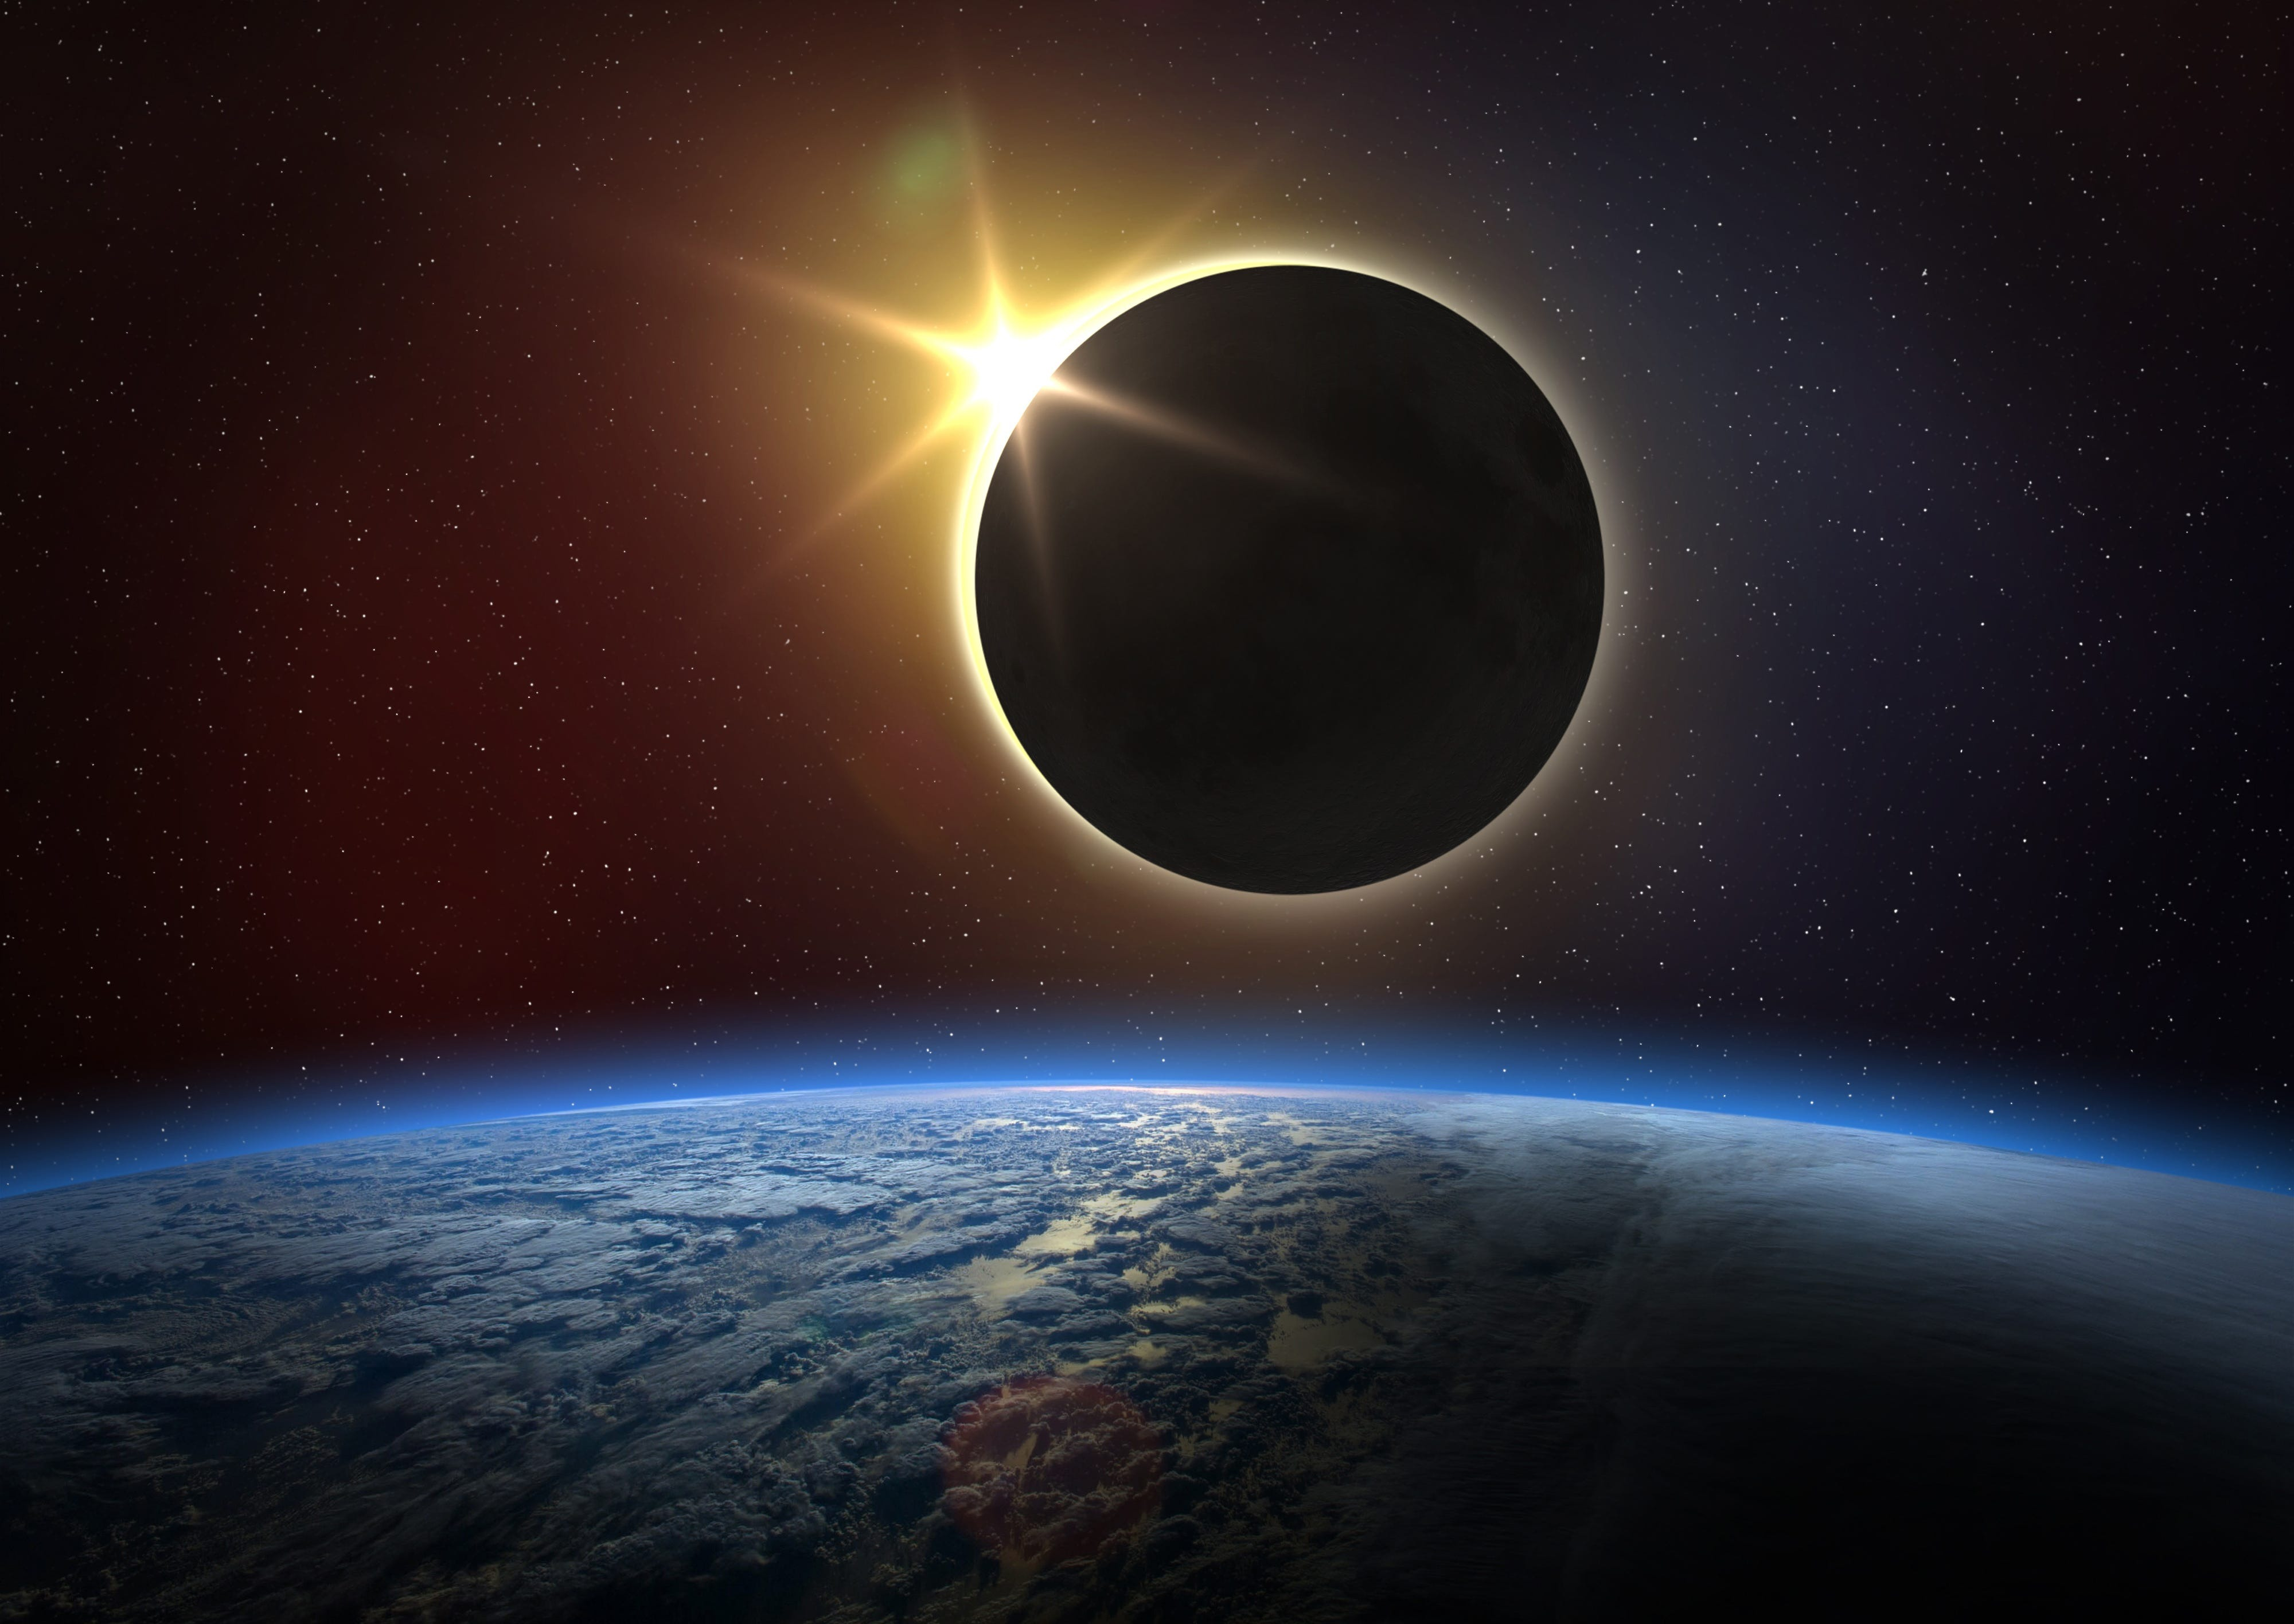 What can the solar eclipse tell us about the environment?